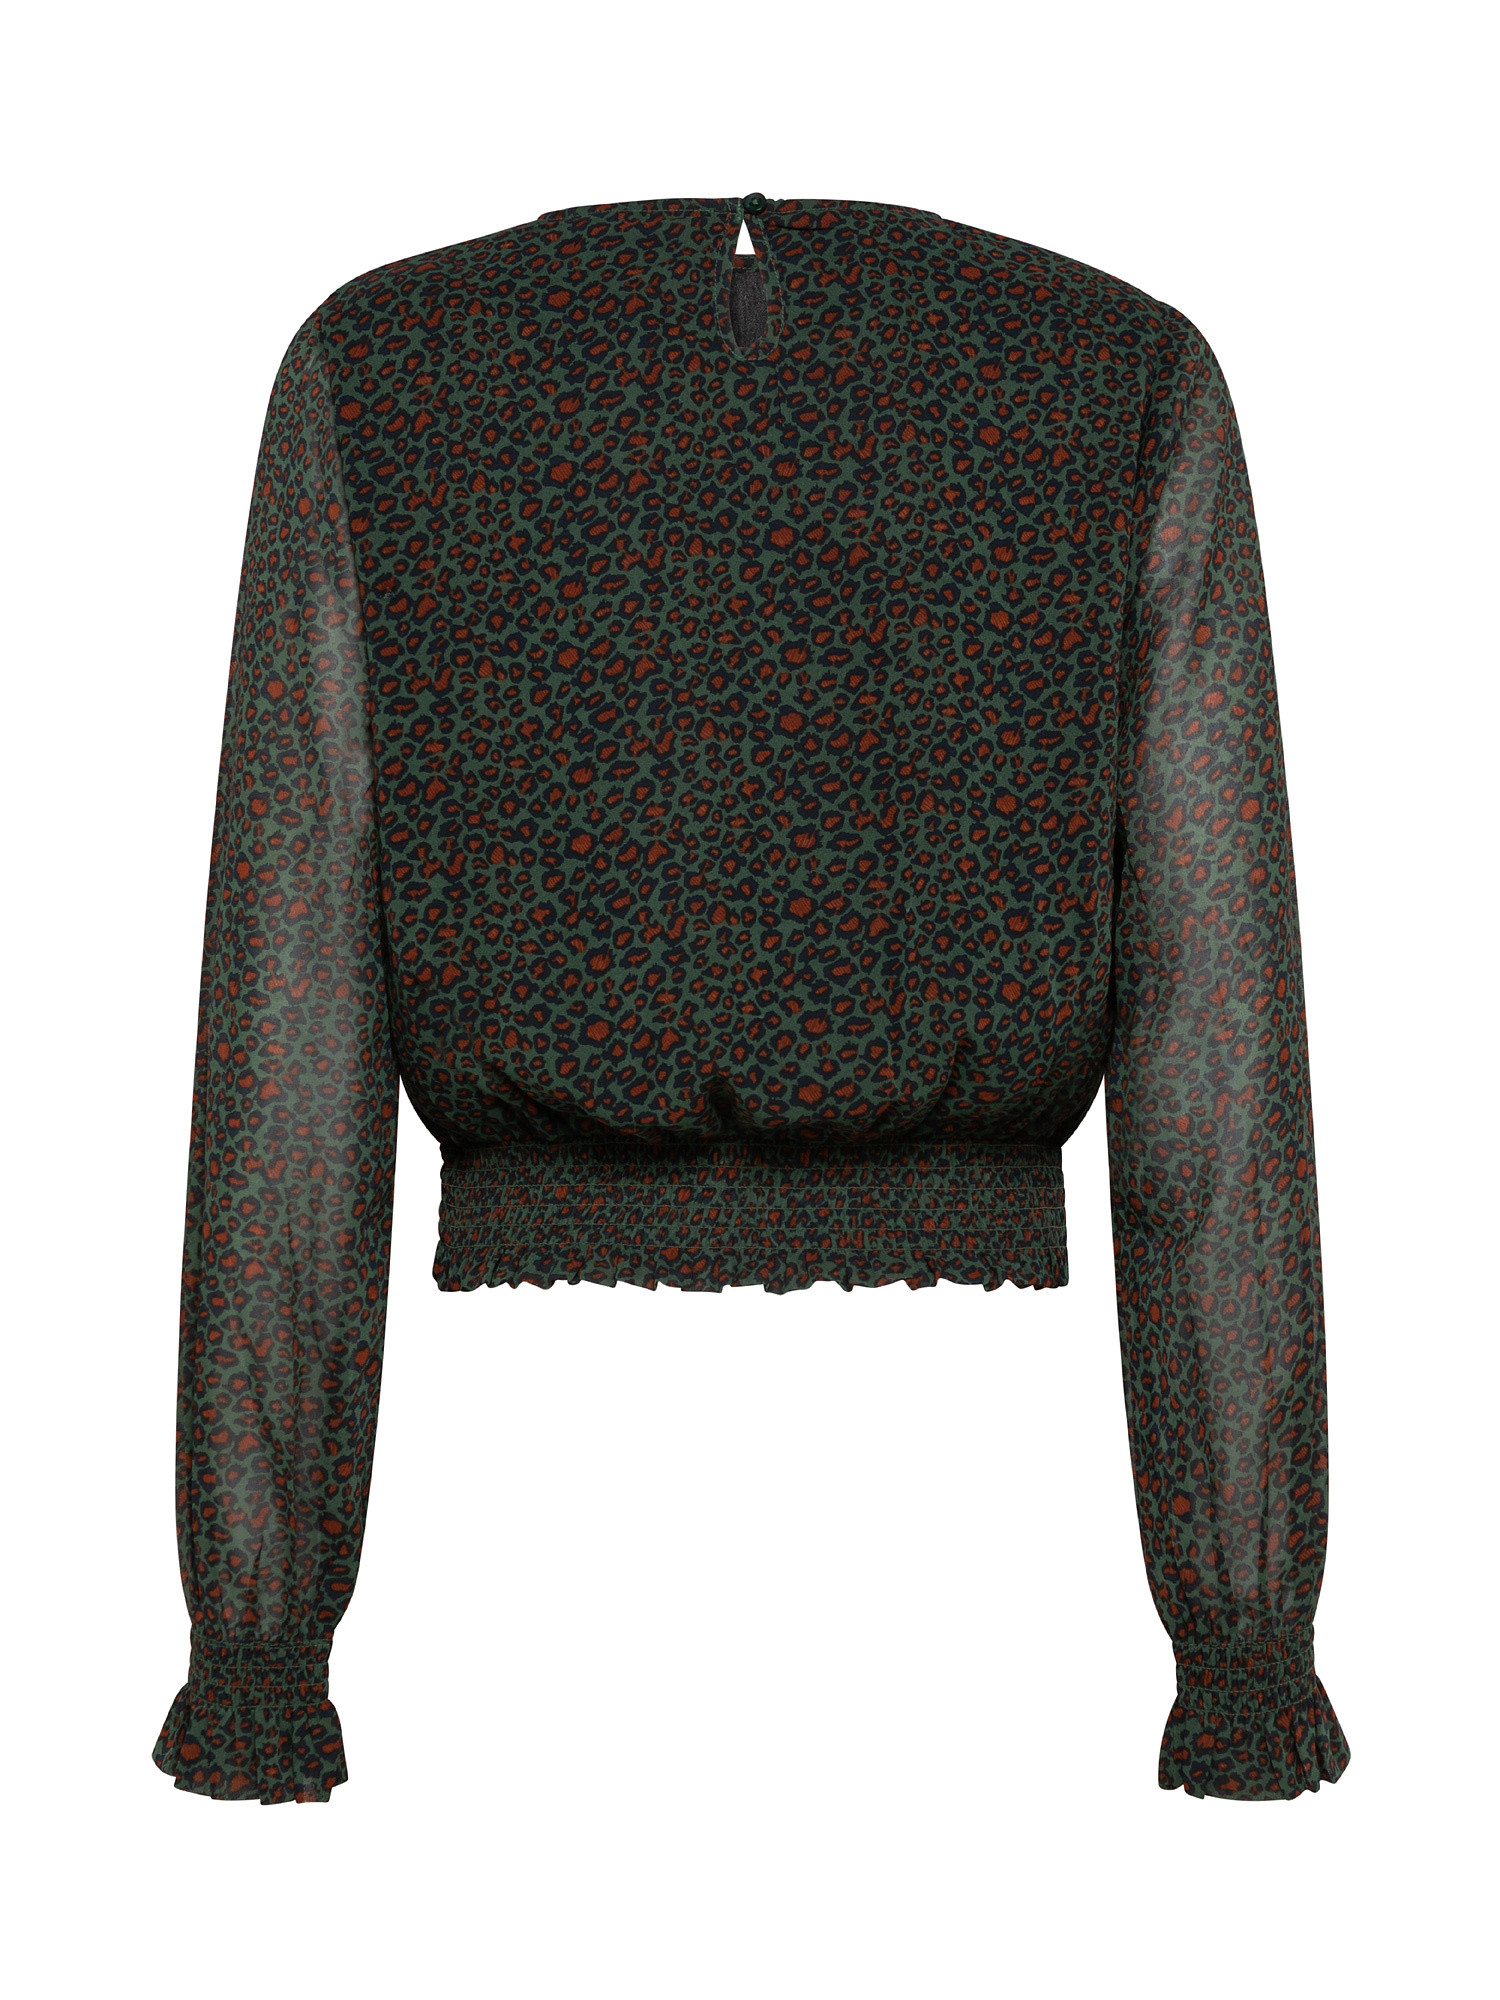 Blouse with pattern, Black, large image number 1